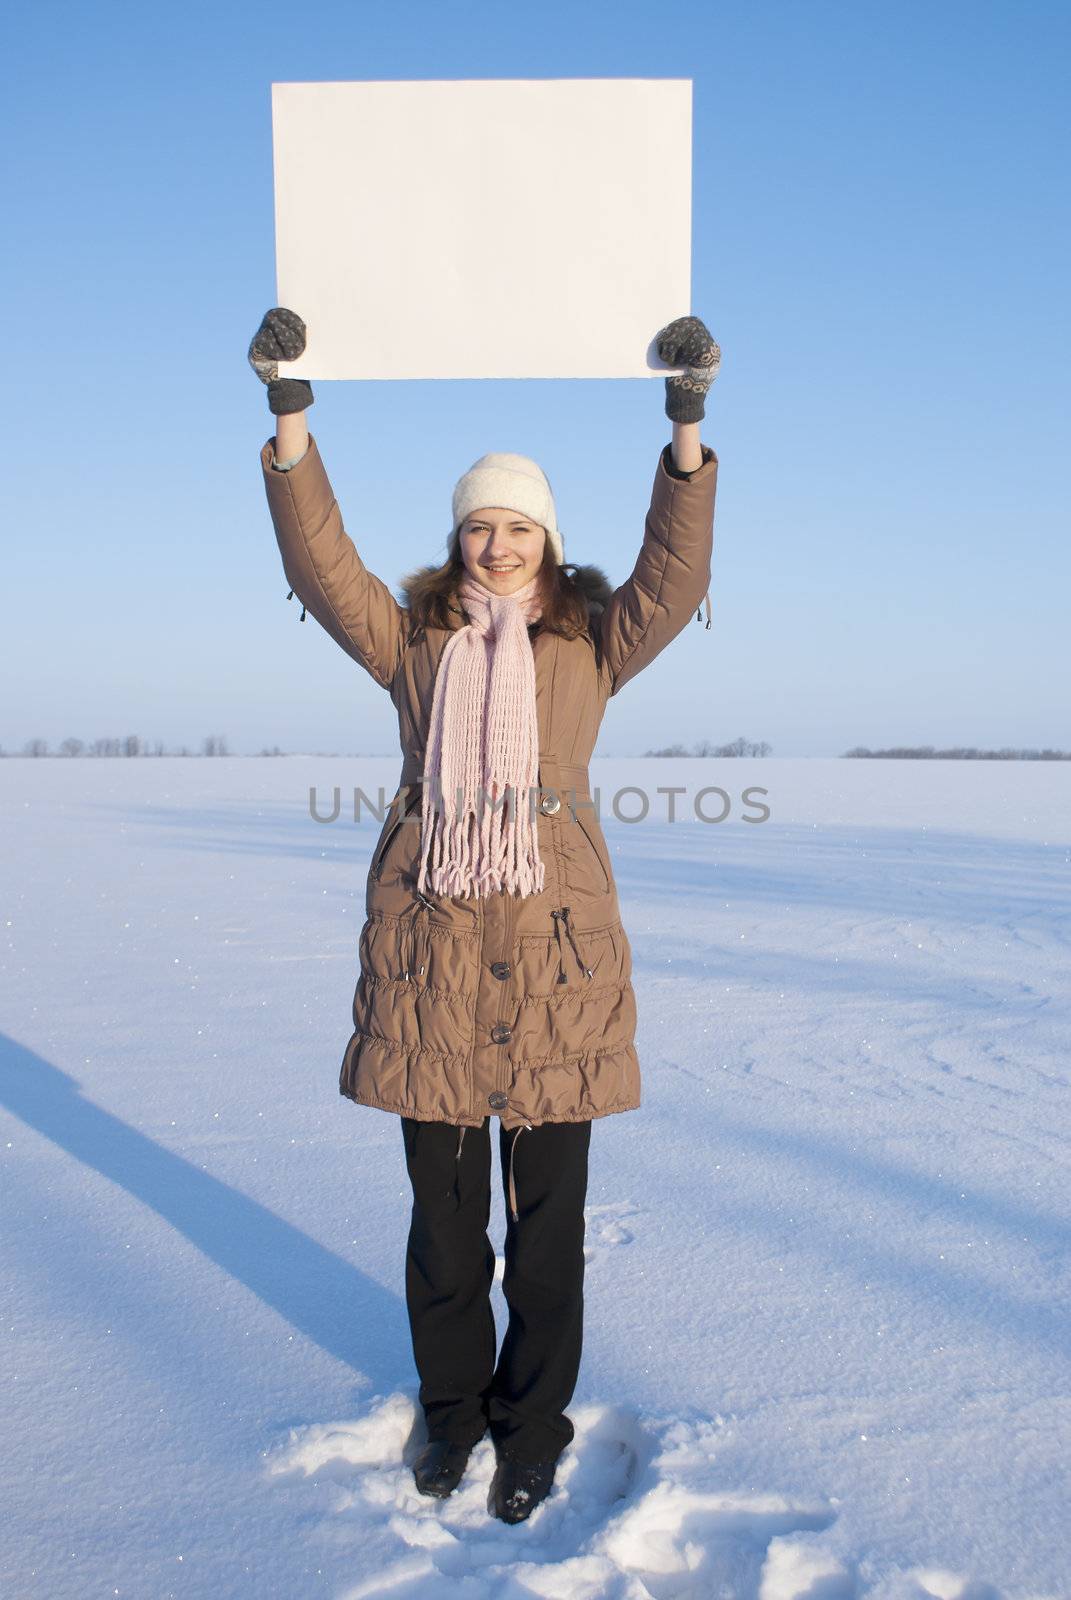 Girl holding white poster at winter snowy field